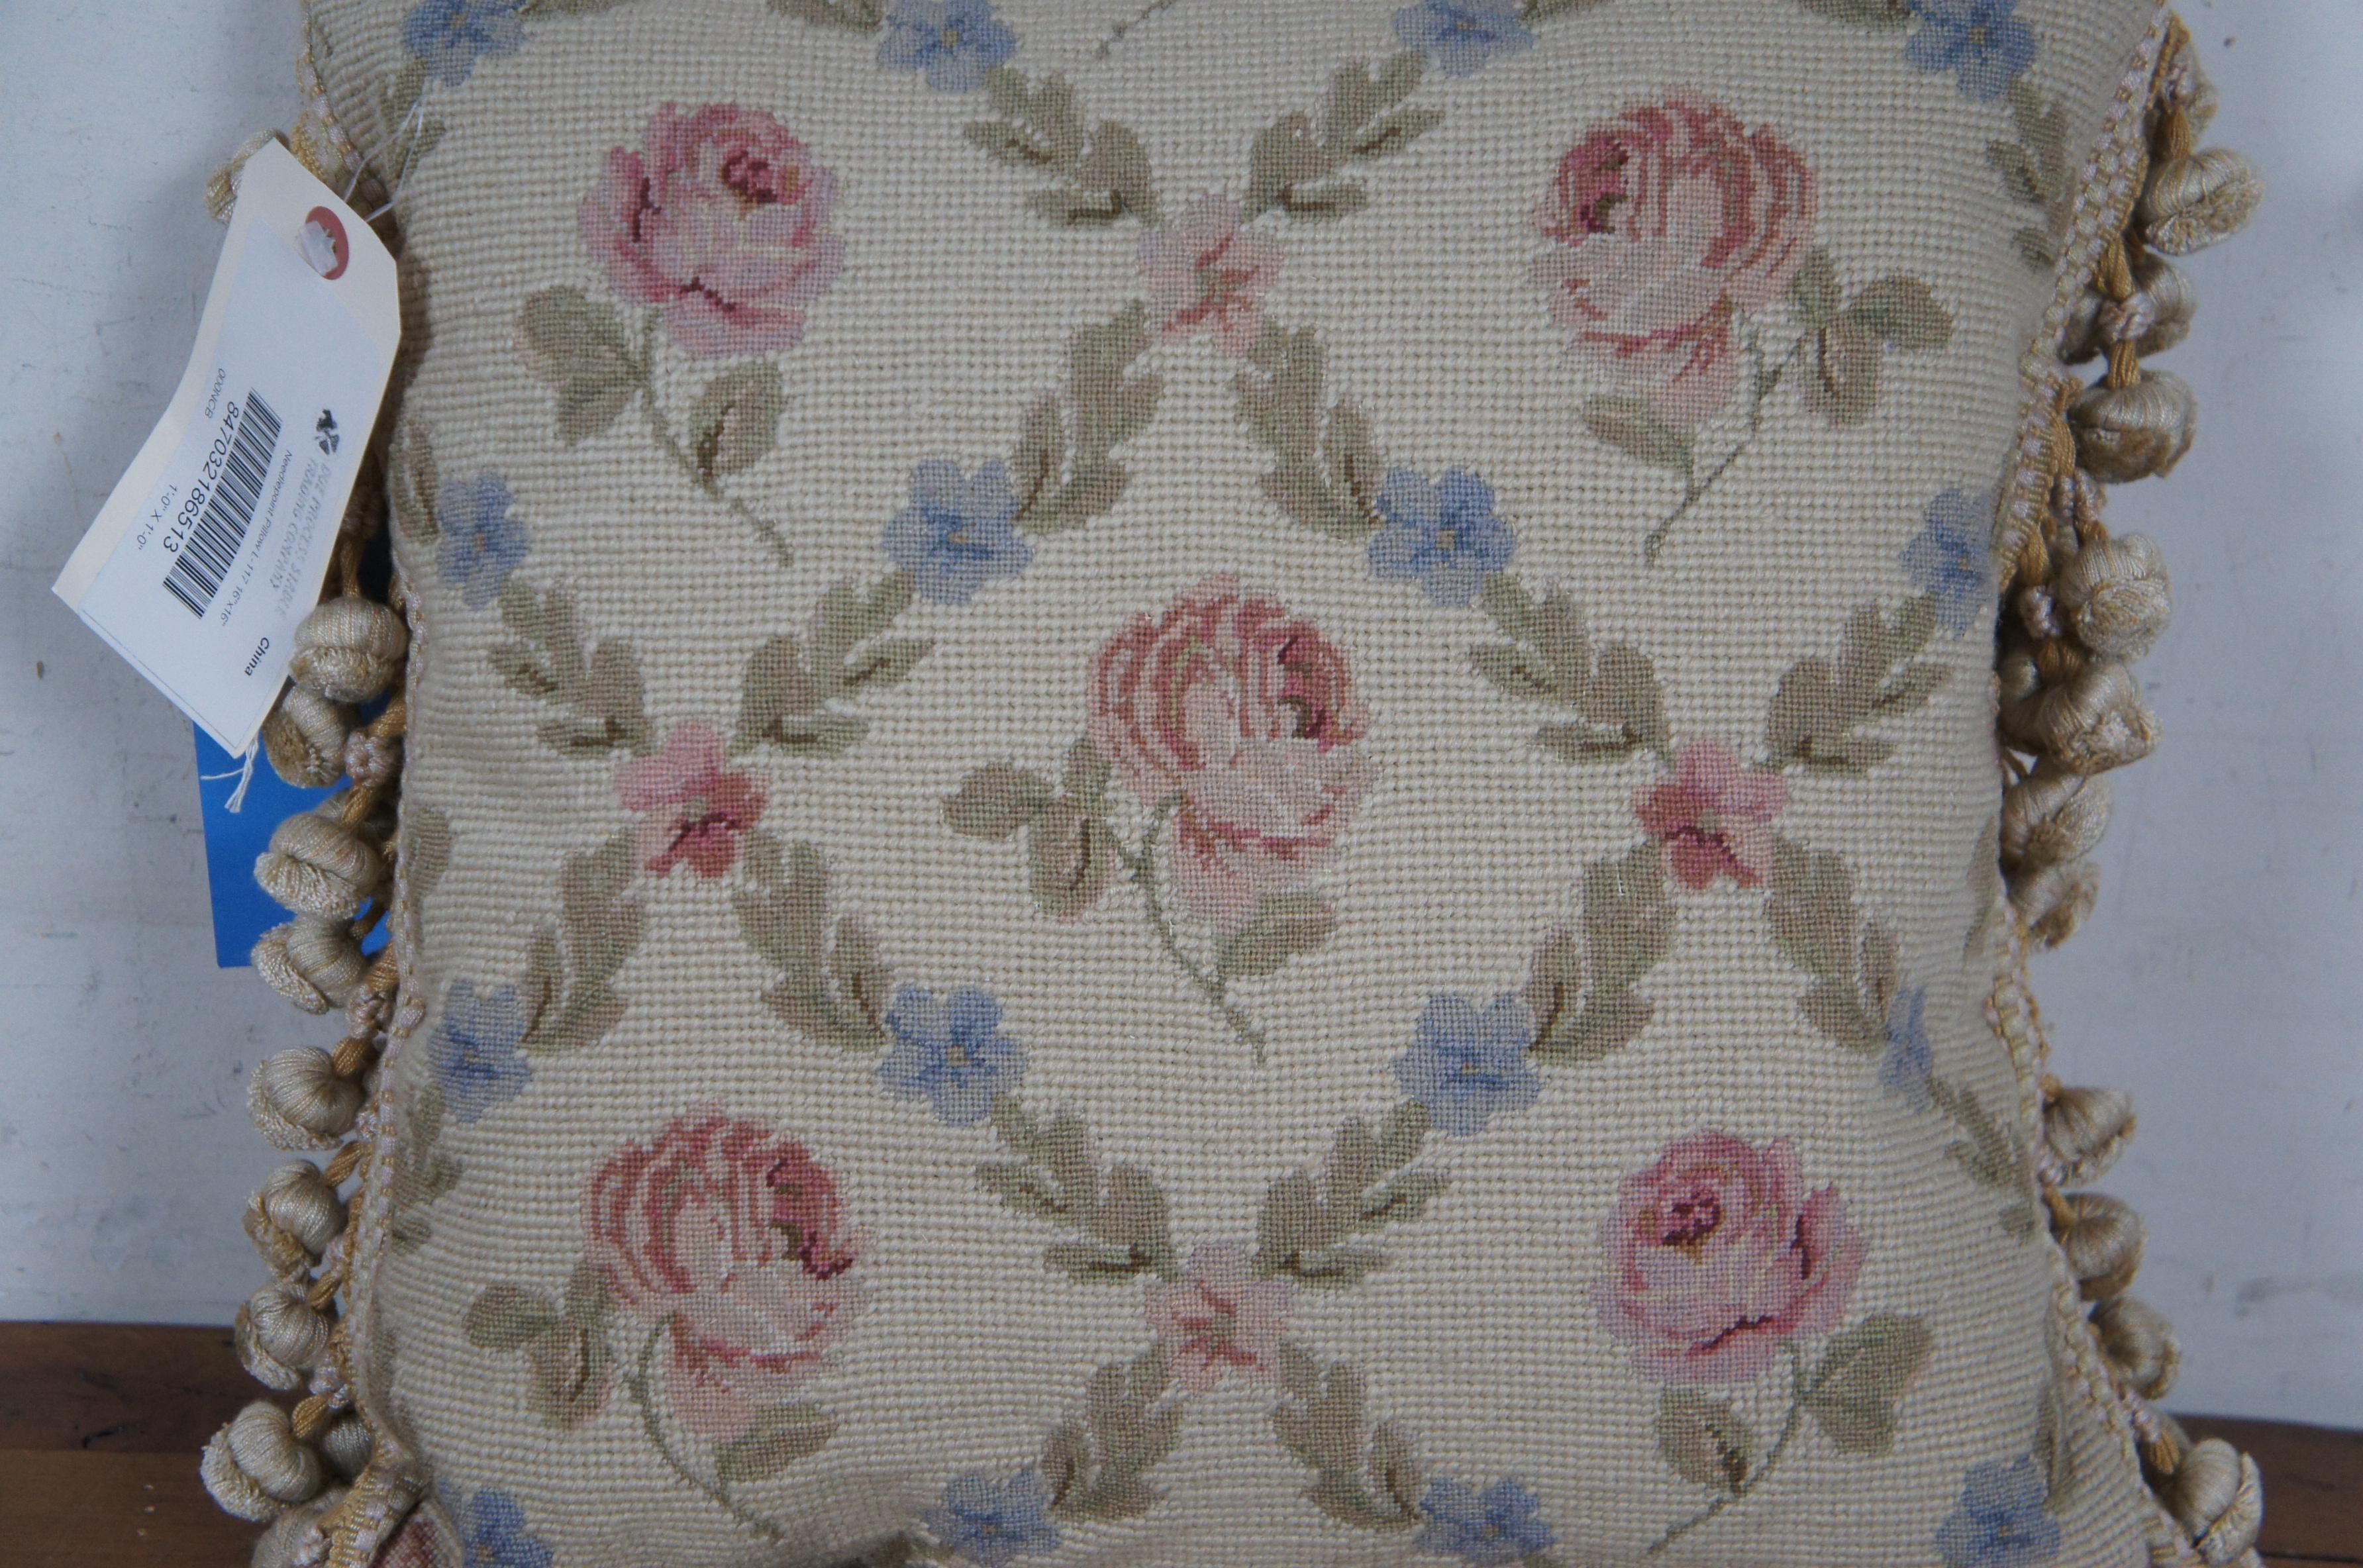 20th Century Down Filled Floral Crossed Roses Needlepoint Tassel Lumbar Throw Pillow 16